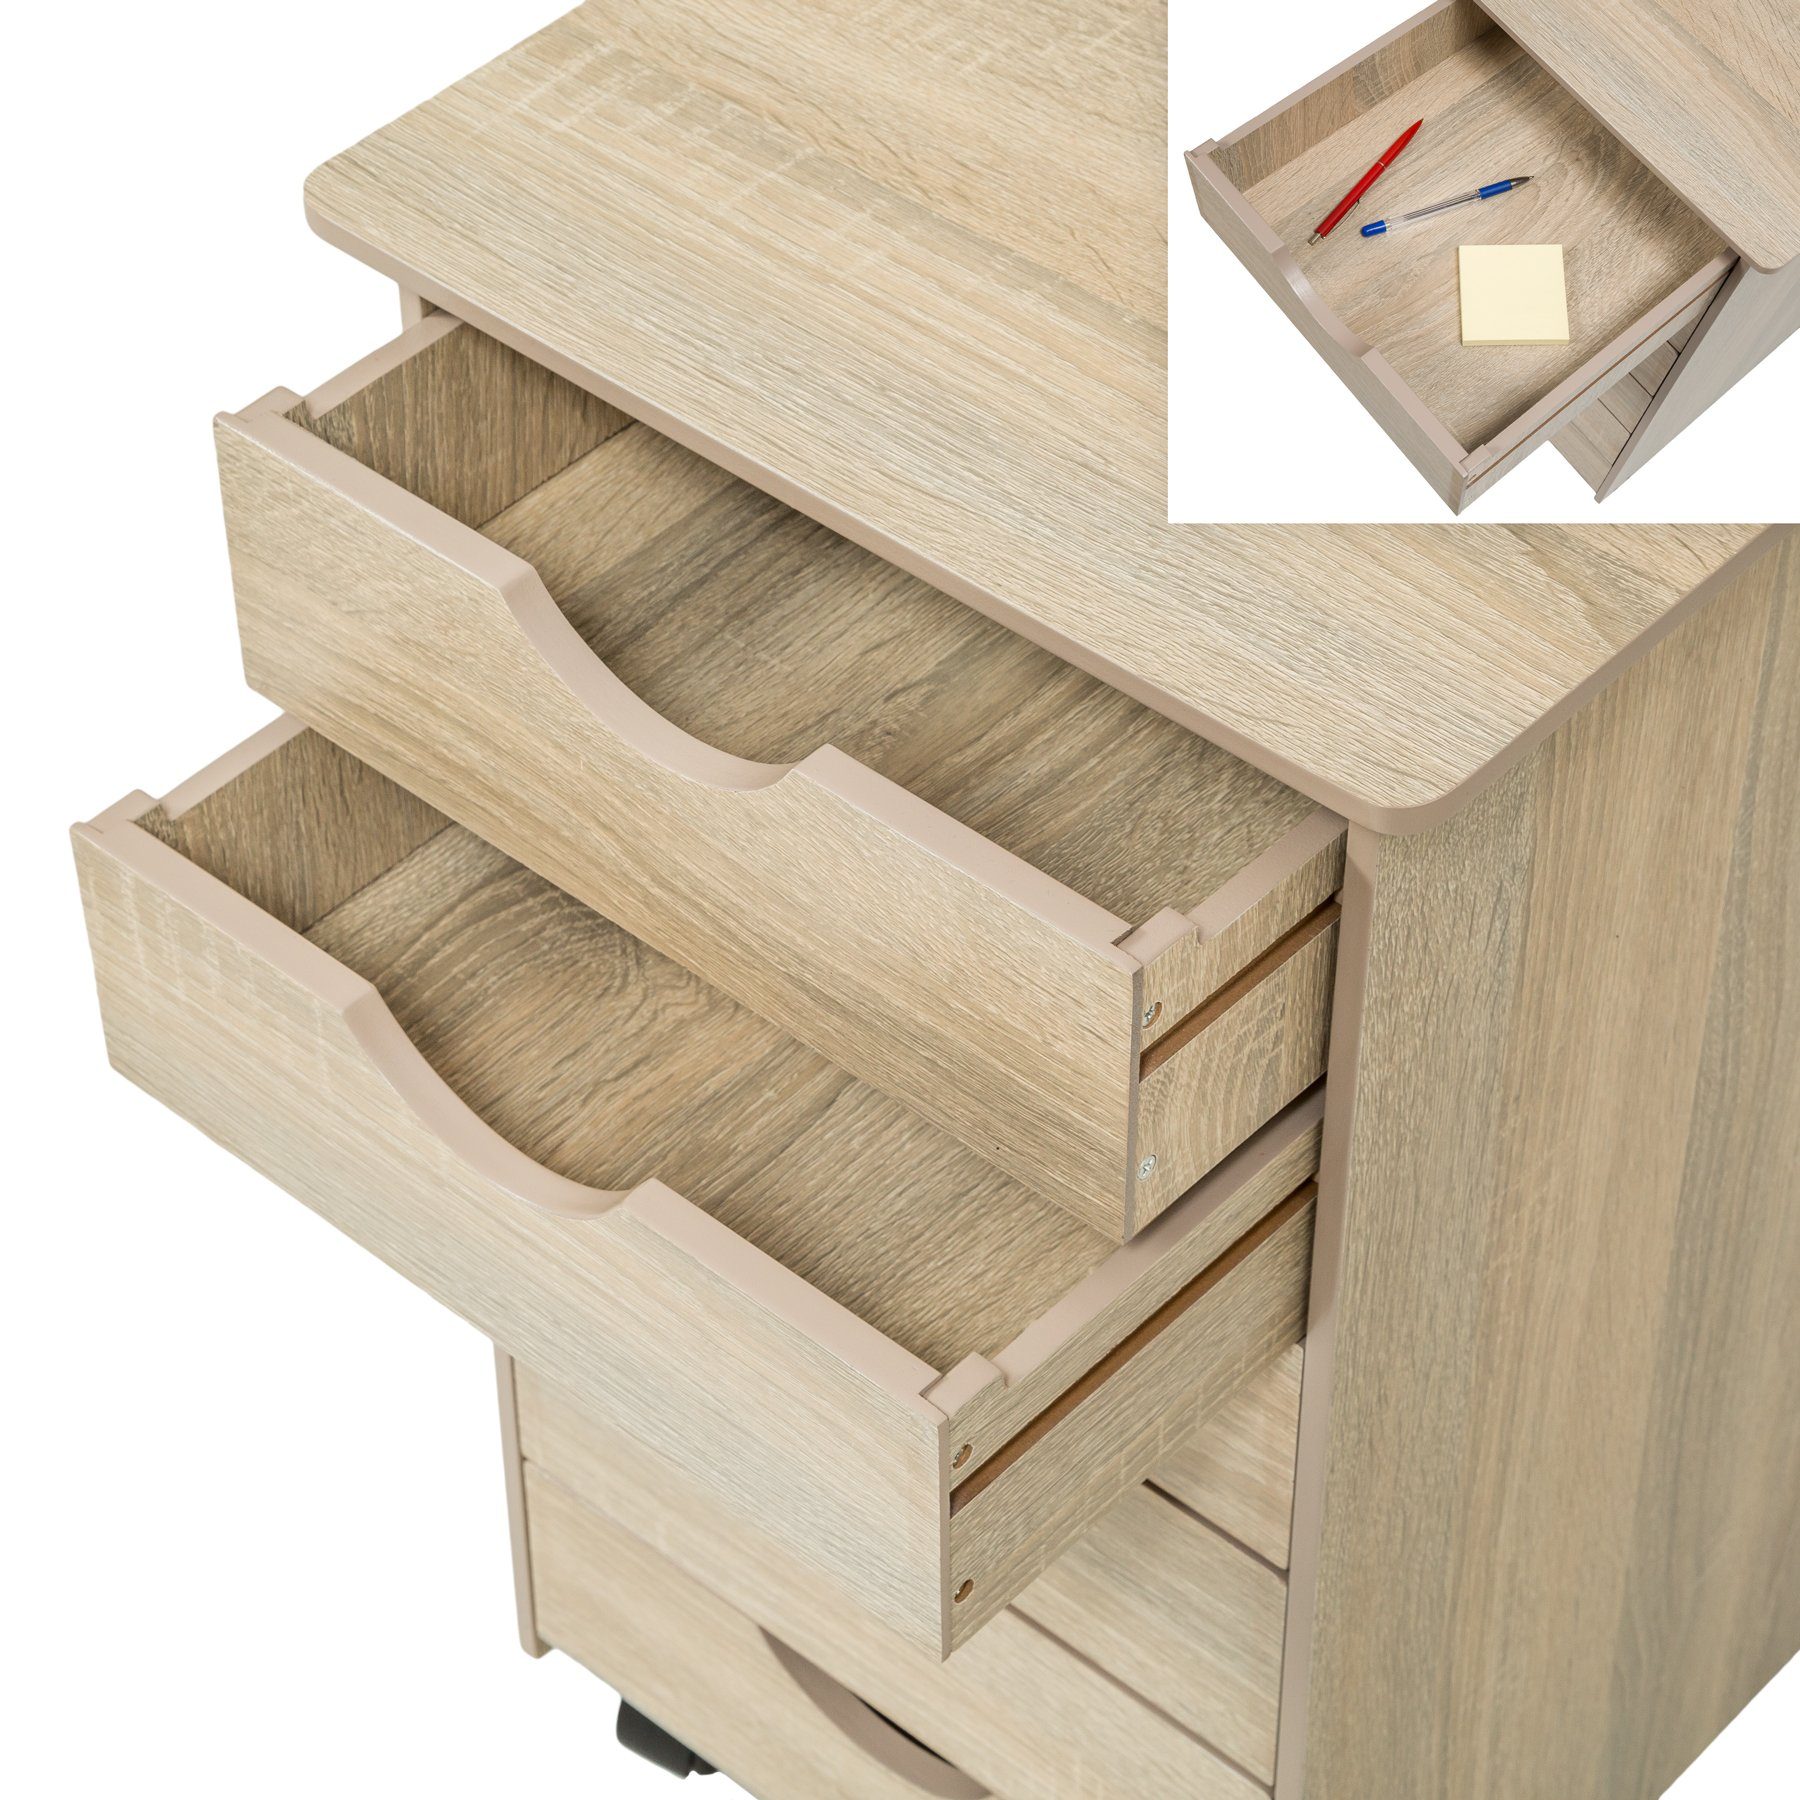 Holz tectake Rollcontainer Eiche Rollcontainer Holz Sonoma hell, aus 65x36x40cm